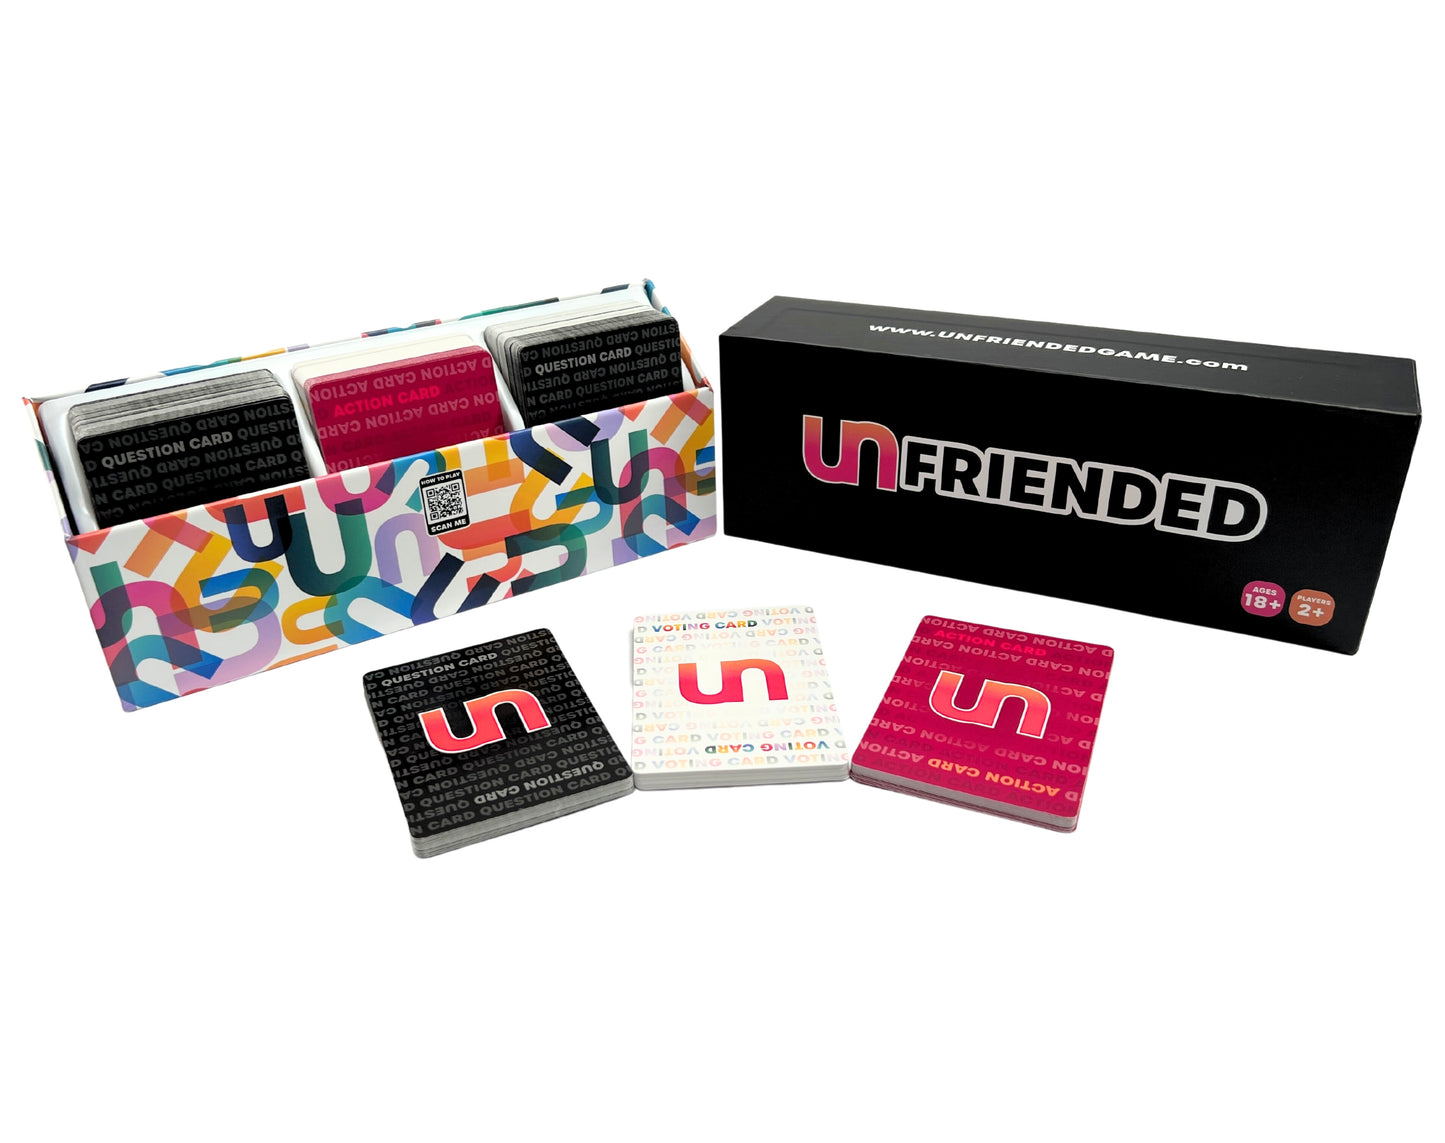 Unfriended card game